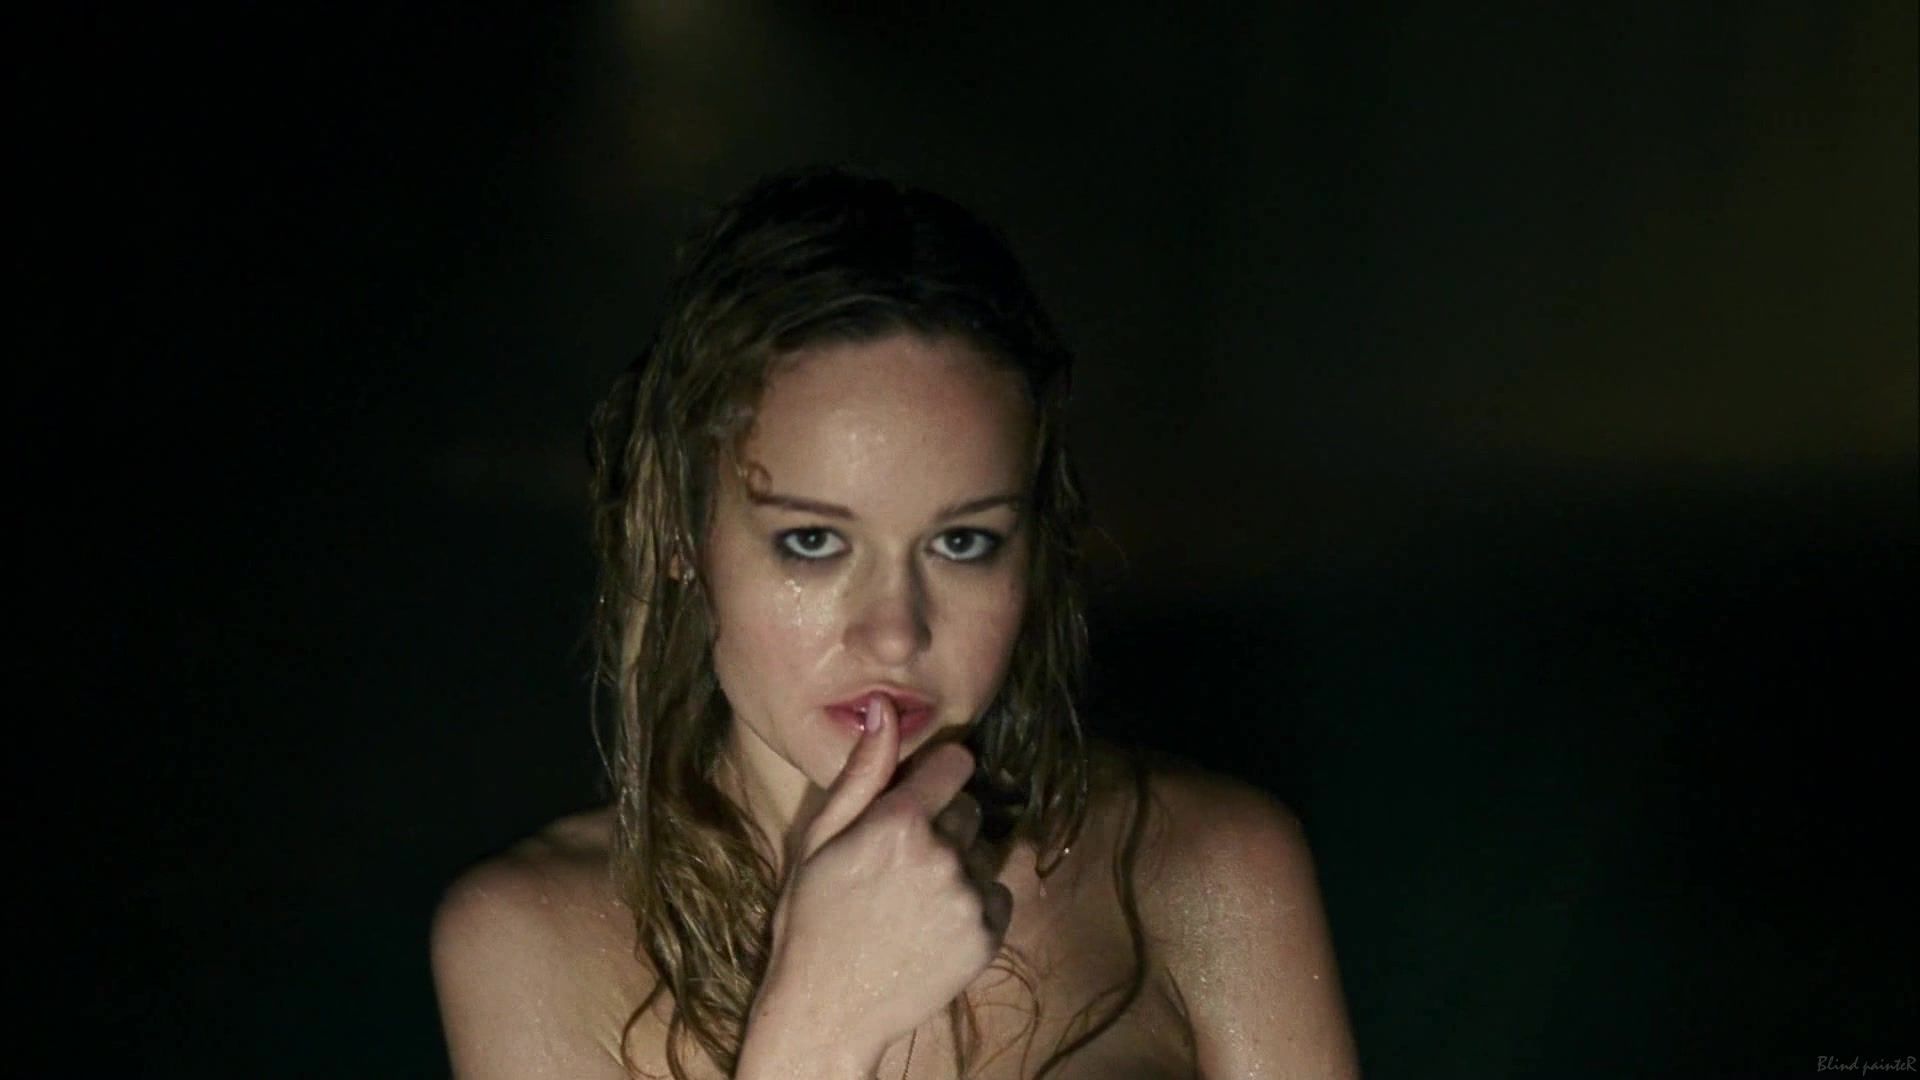 Hot Milf Brie Larson nude - Tanner Hall (2009) BooLoo - 1